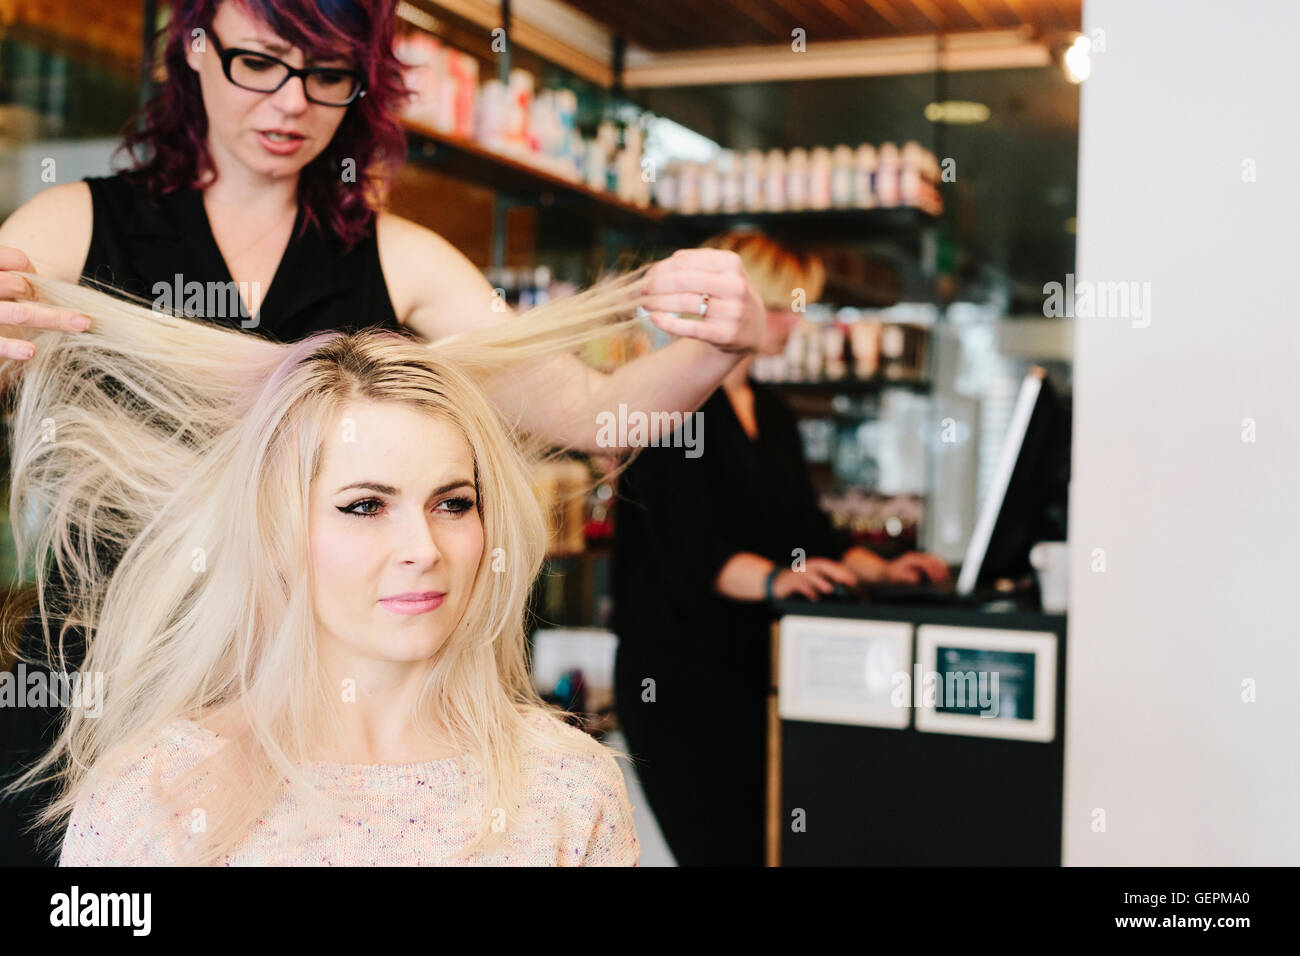 A hair stylist and a client, a young woman with long blonde hair, at a hair salon. Stock Photo